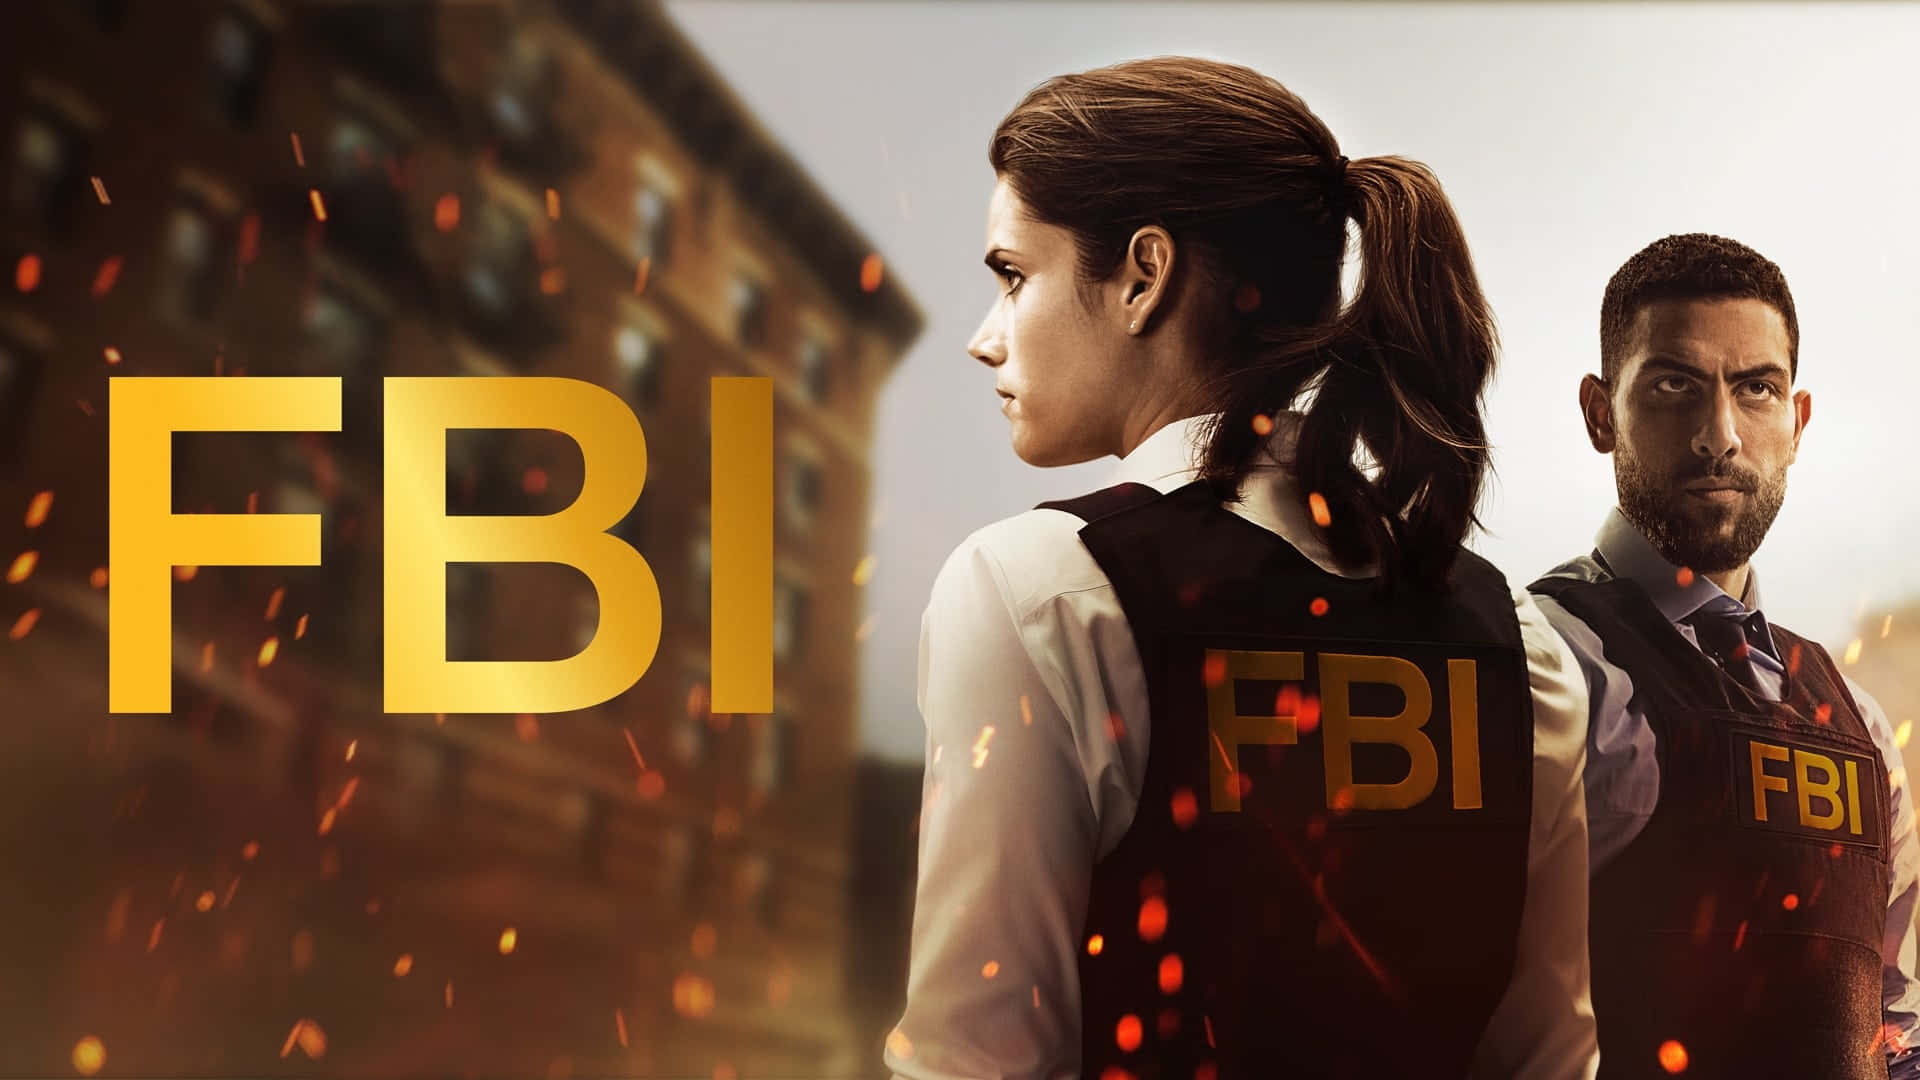 Fbi - A Man And Woman Standing In Front Of A City